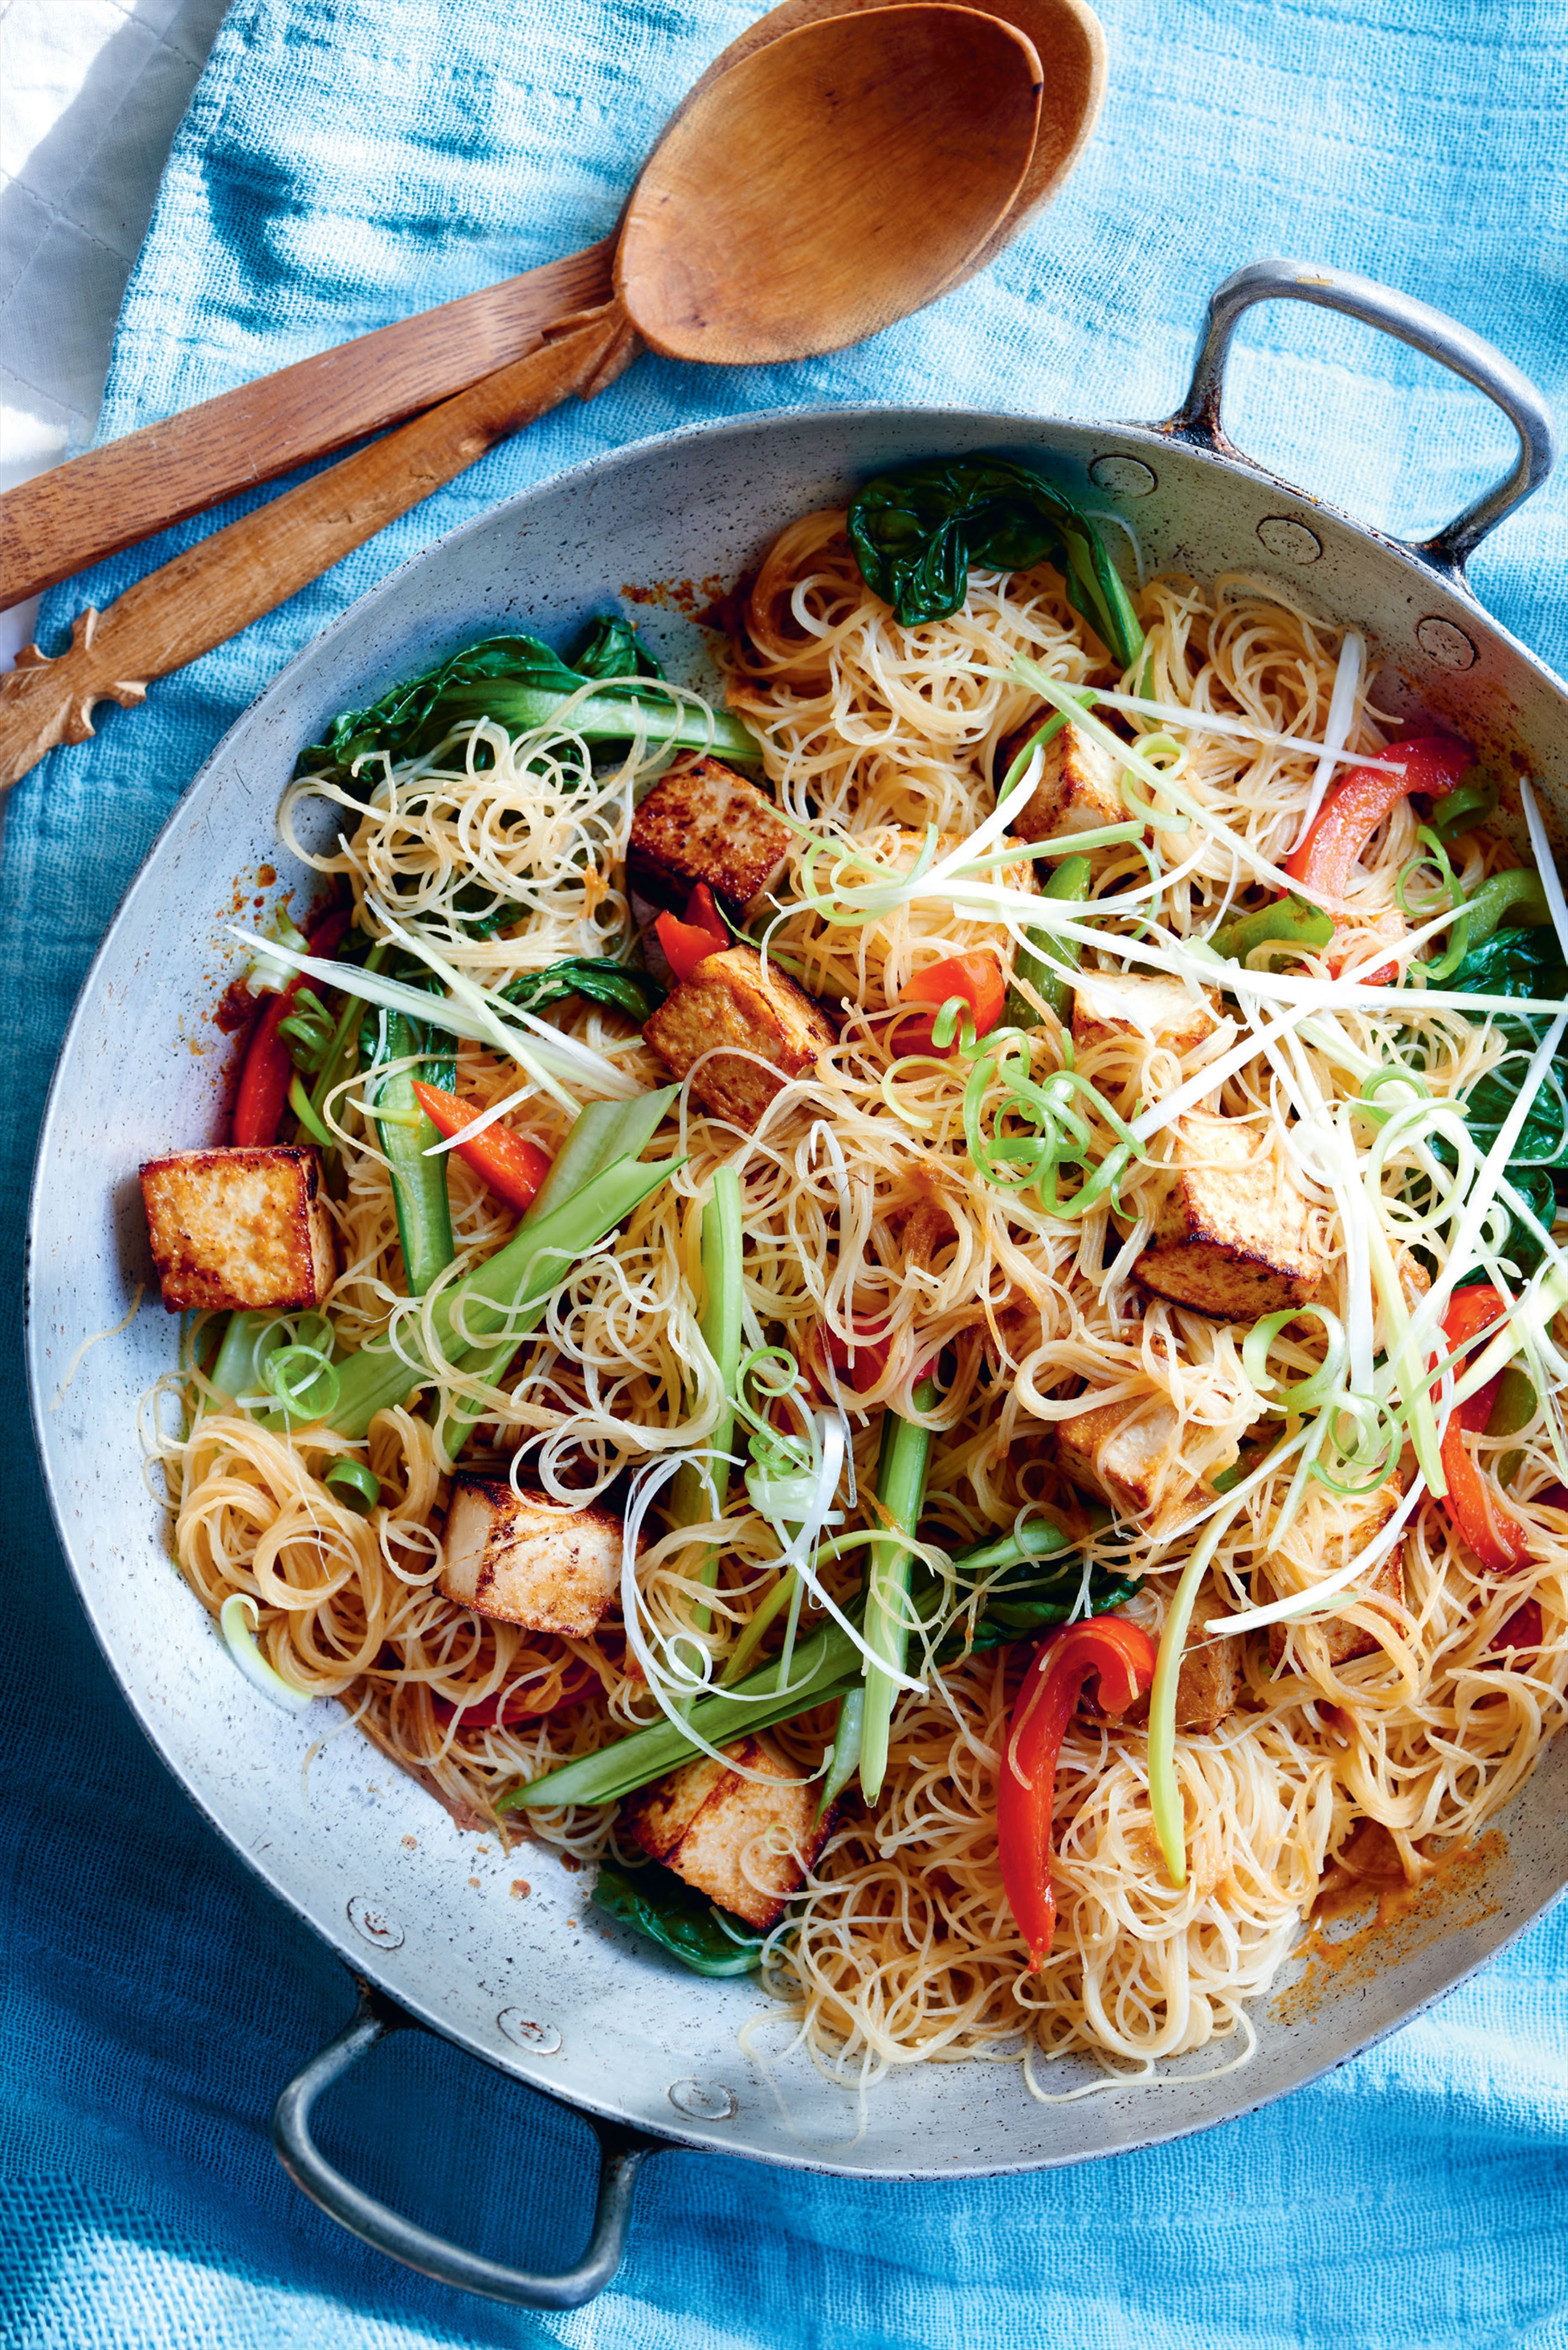 Marinated tofu stir-fry with kelp noodles and Asian greens